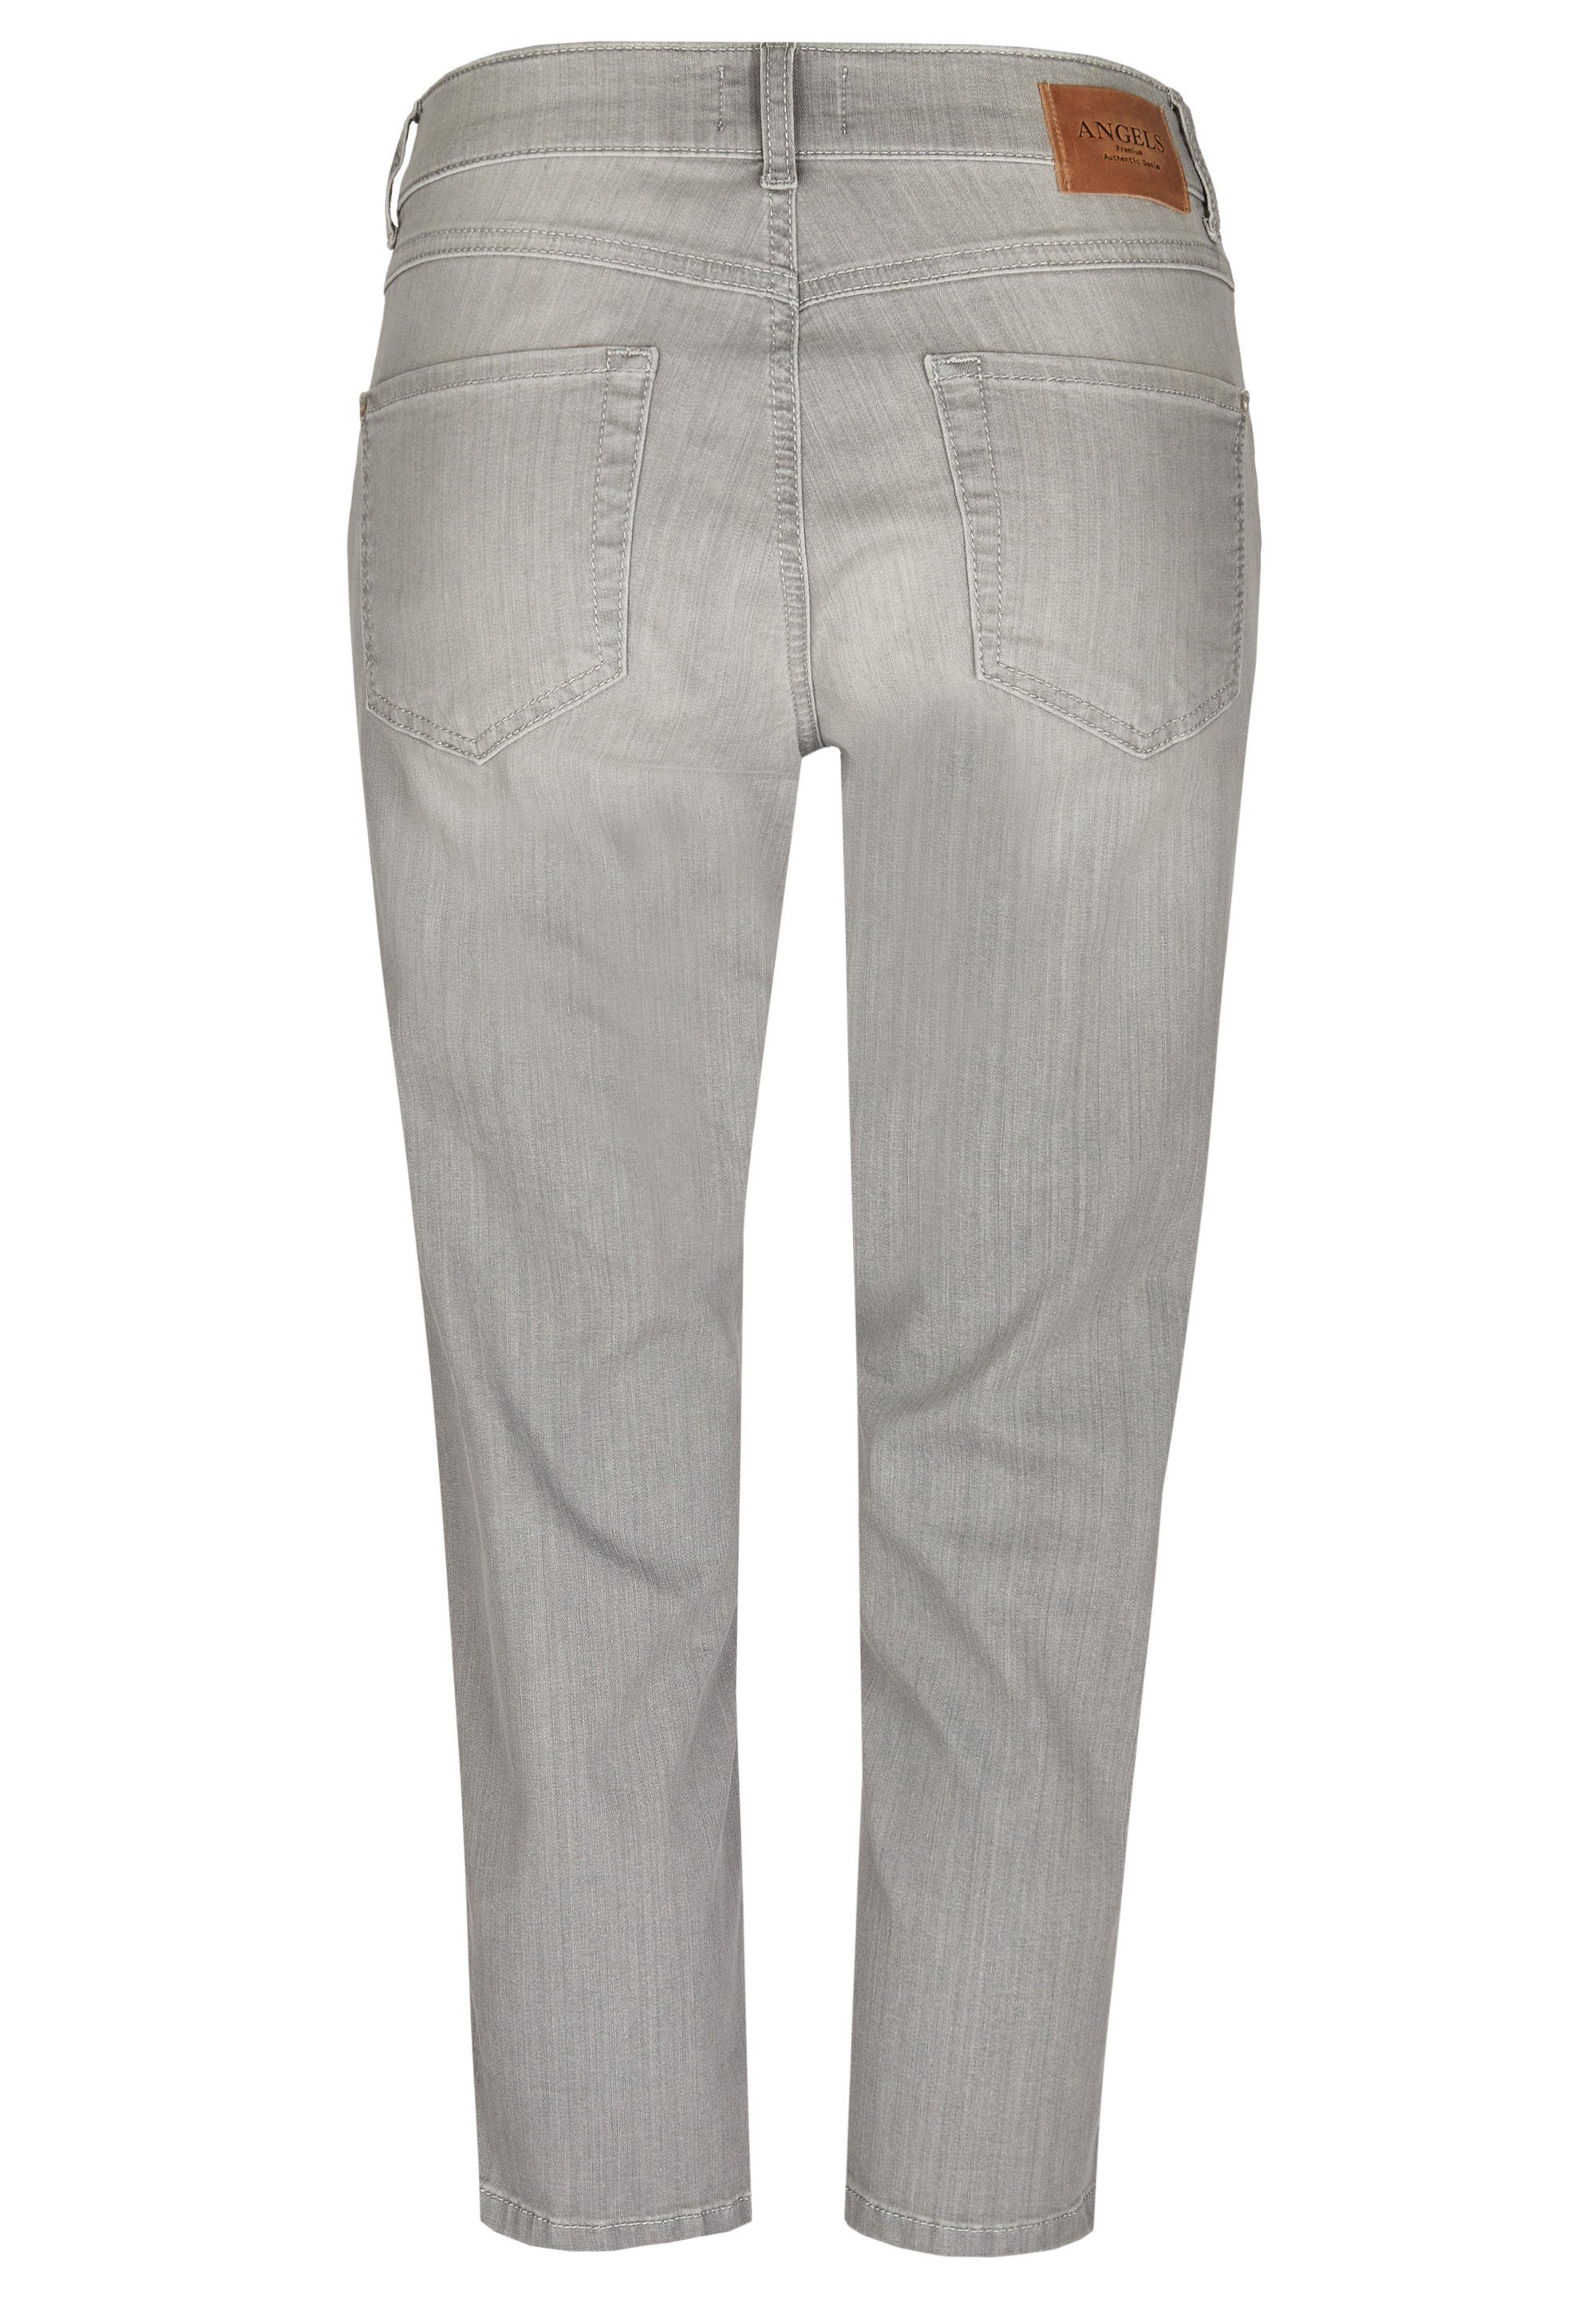 used 750000.1458 light grey TU used CICI ANGELS JEANS grey 332 1458 Stretch-Jeans light ANGELS